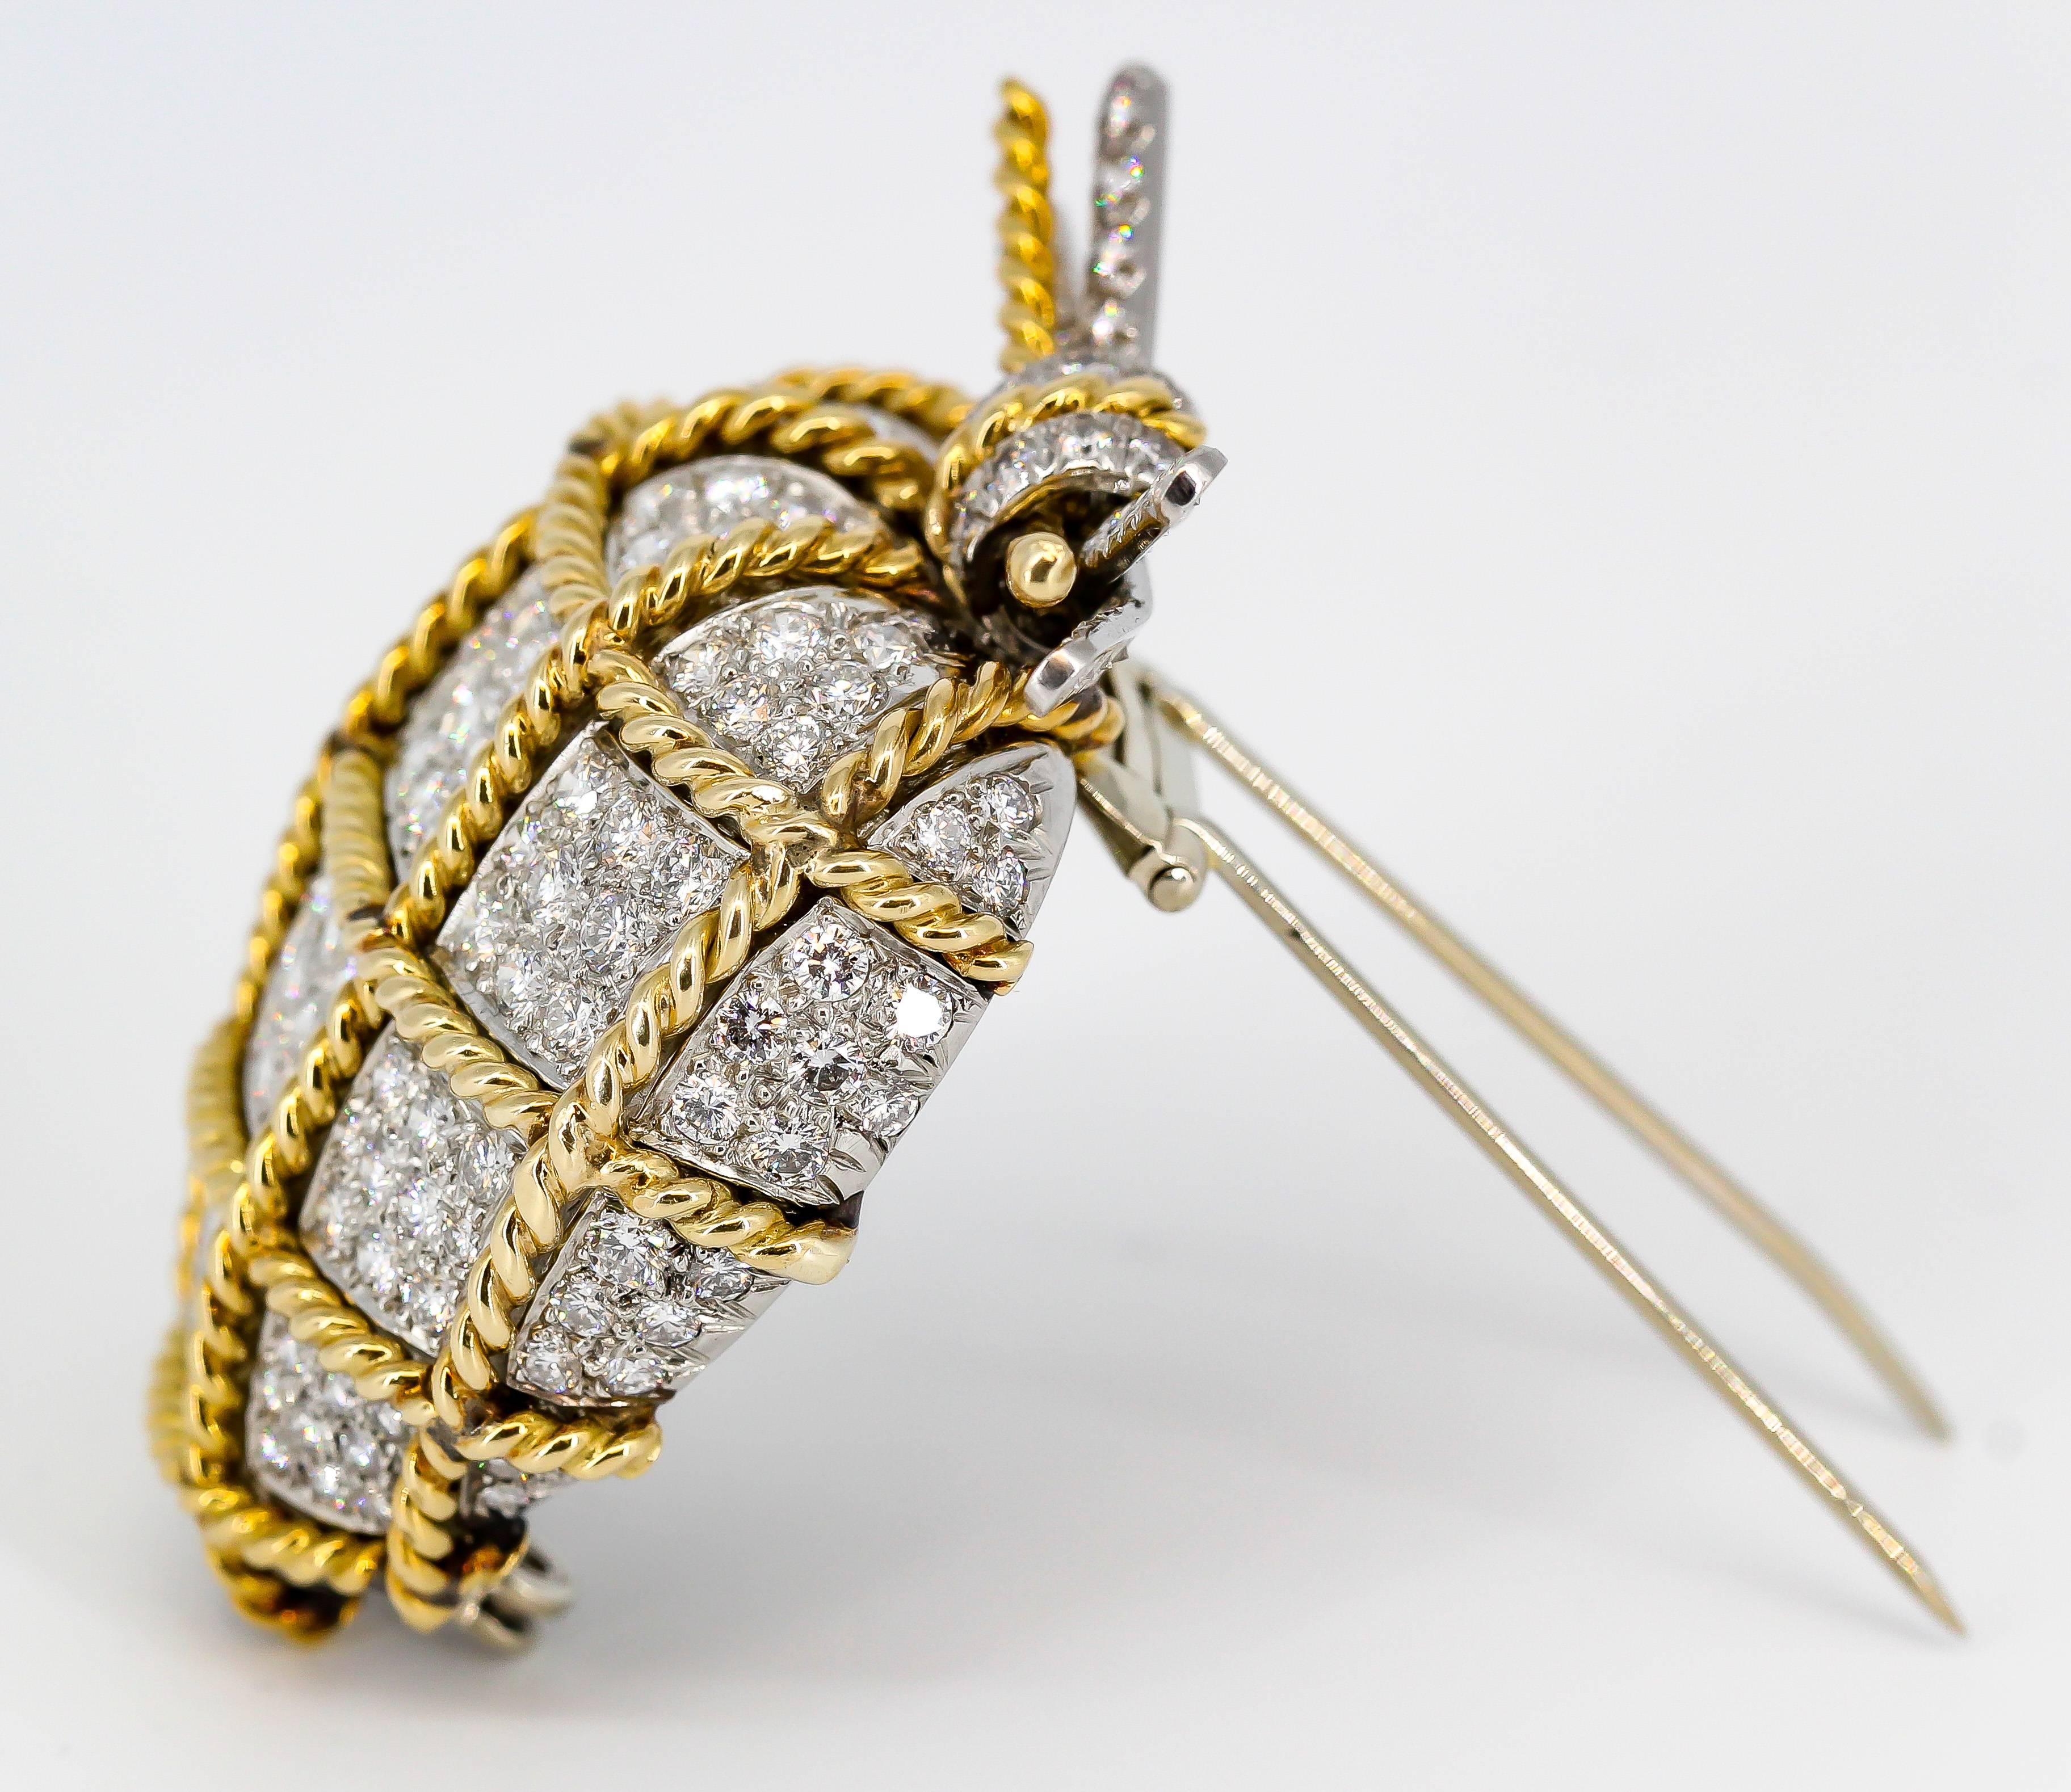 Very fine vintage diamond, platinum and 18K yellow gold brooch by Verdura. It features the shape of a diamond encrusted heart, wrapped with a twisted gold rope, and finished off with a bow on top over an overall platinum setting. Current retail